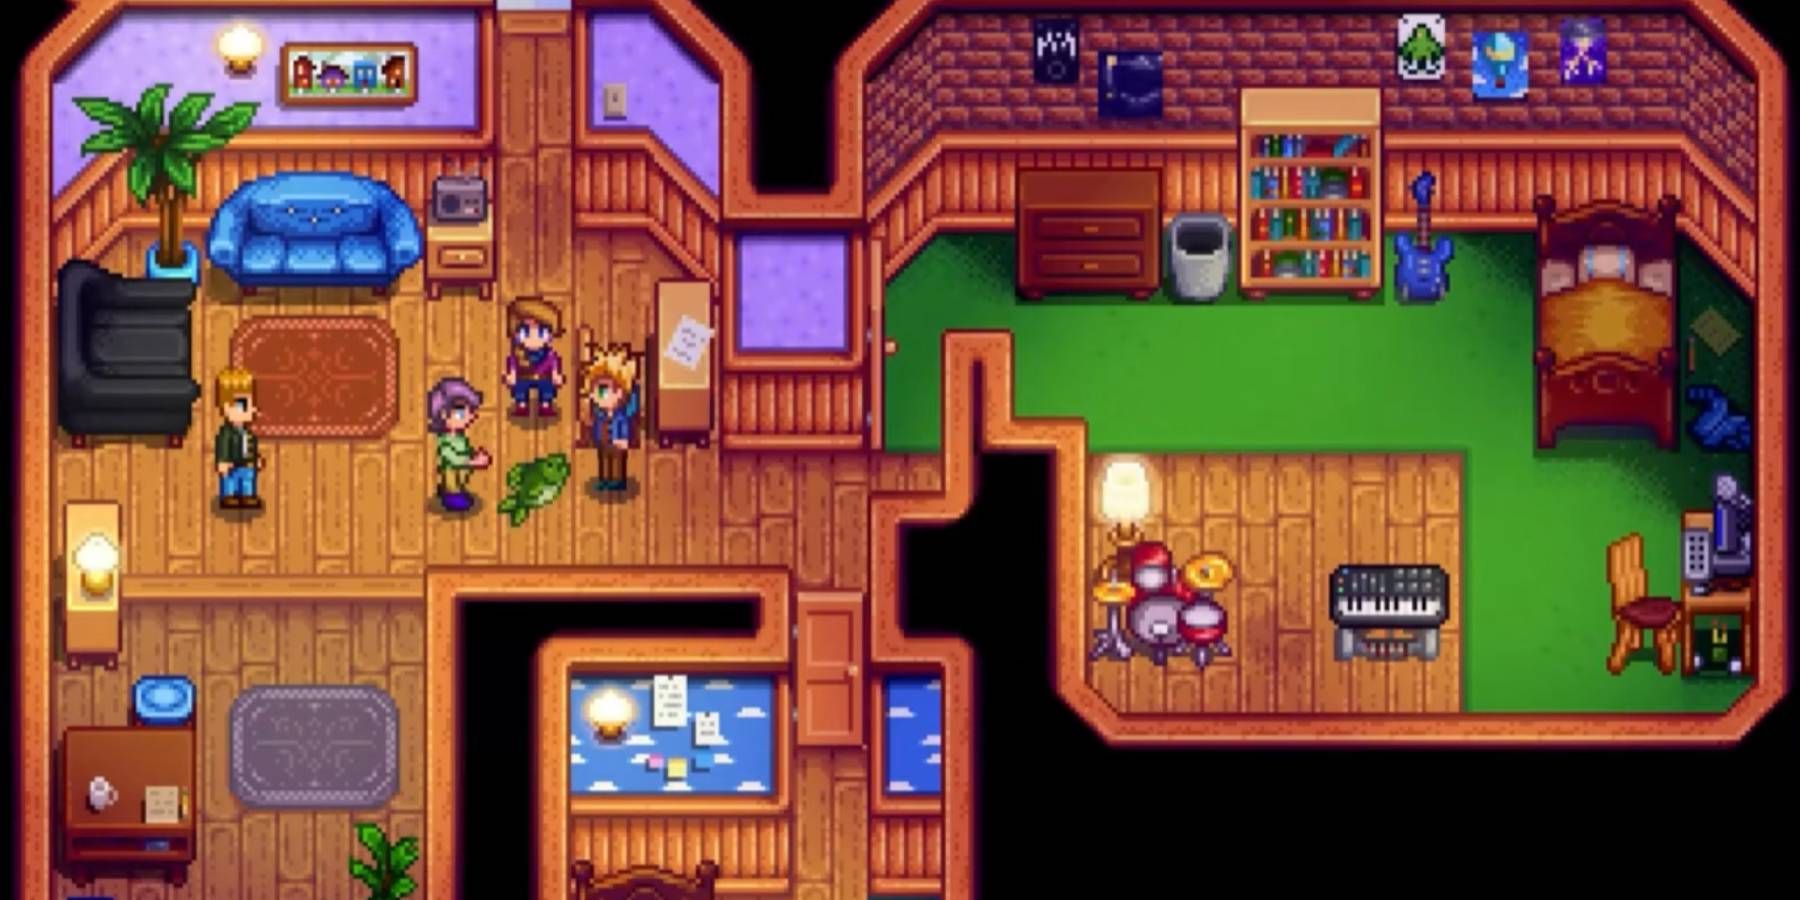 The Fish Casserole scene with Kent, Jodi, and Sam in Stardew Valley